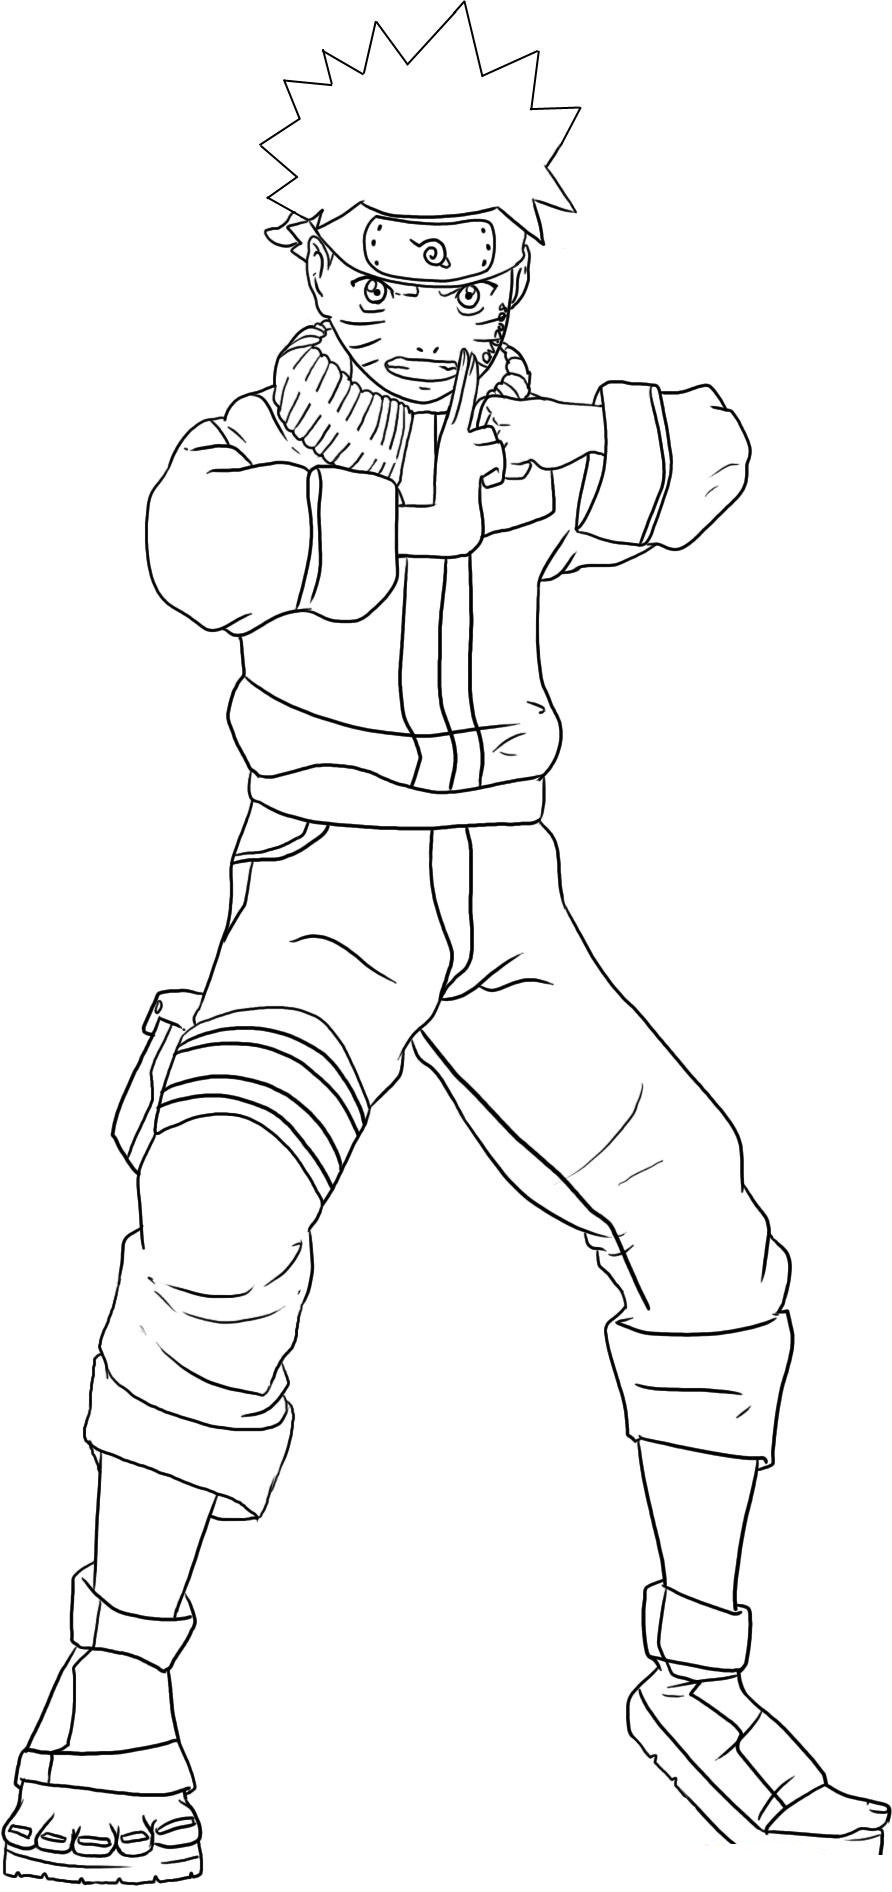 Download Naruto Coloring Pages Sketch Coloring Page